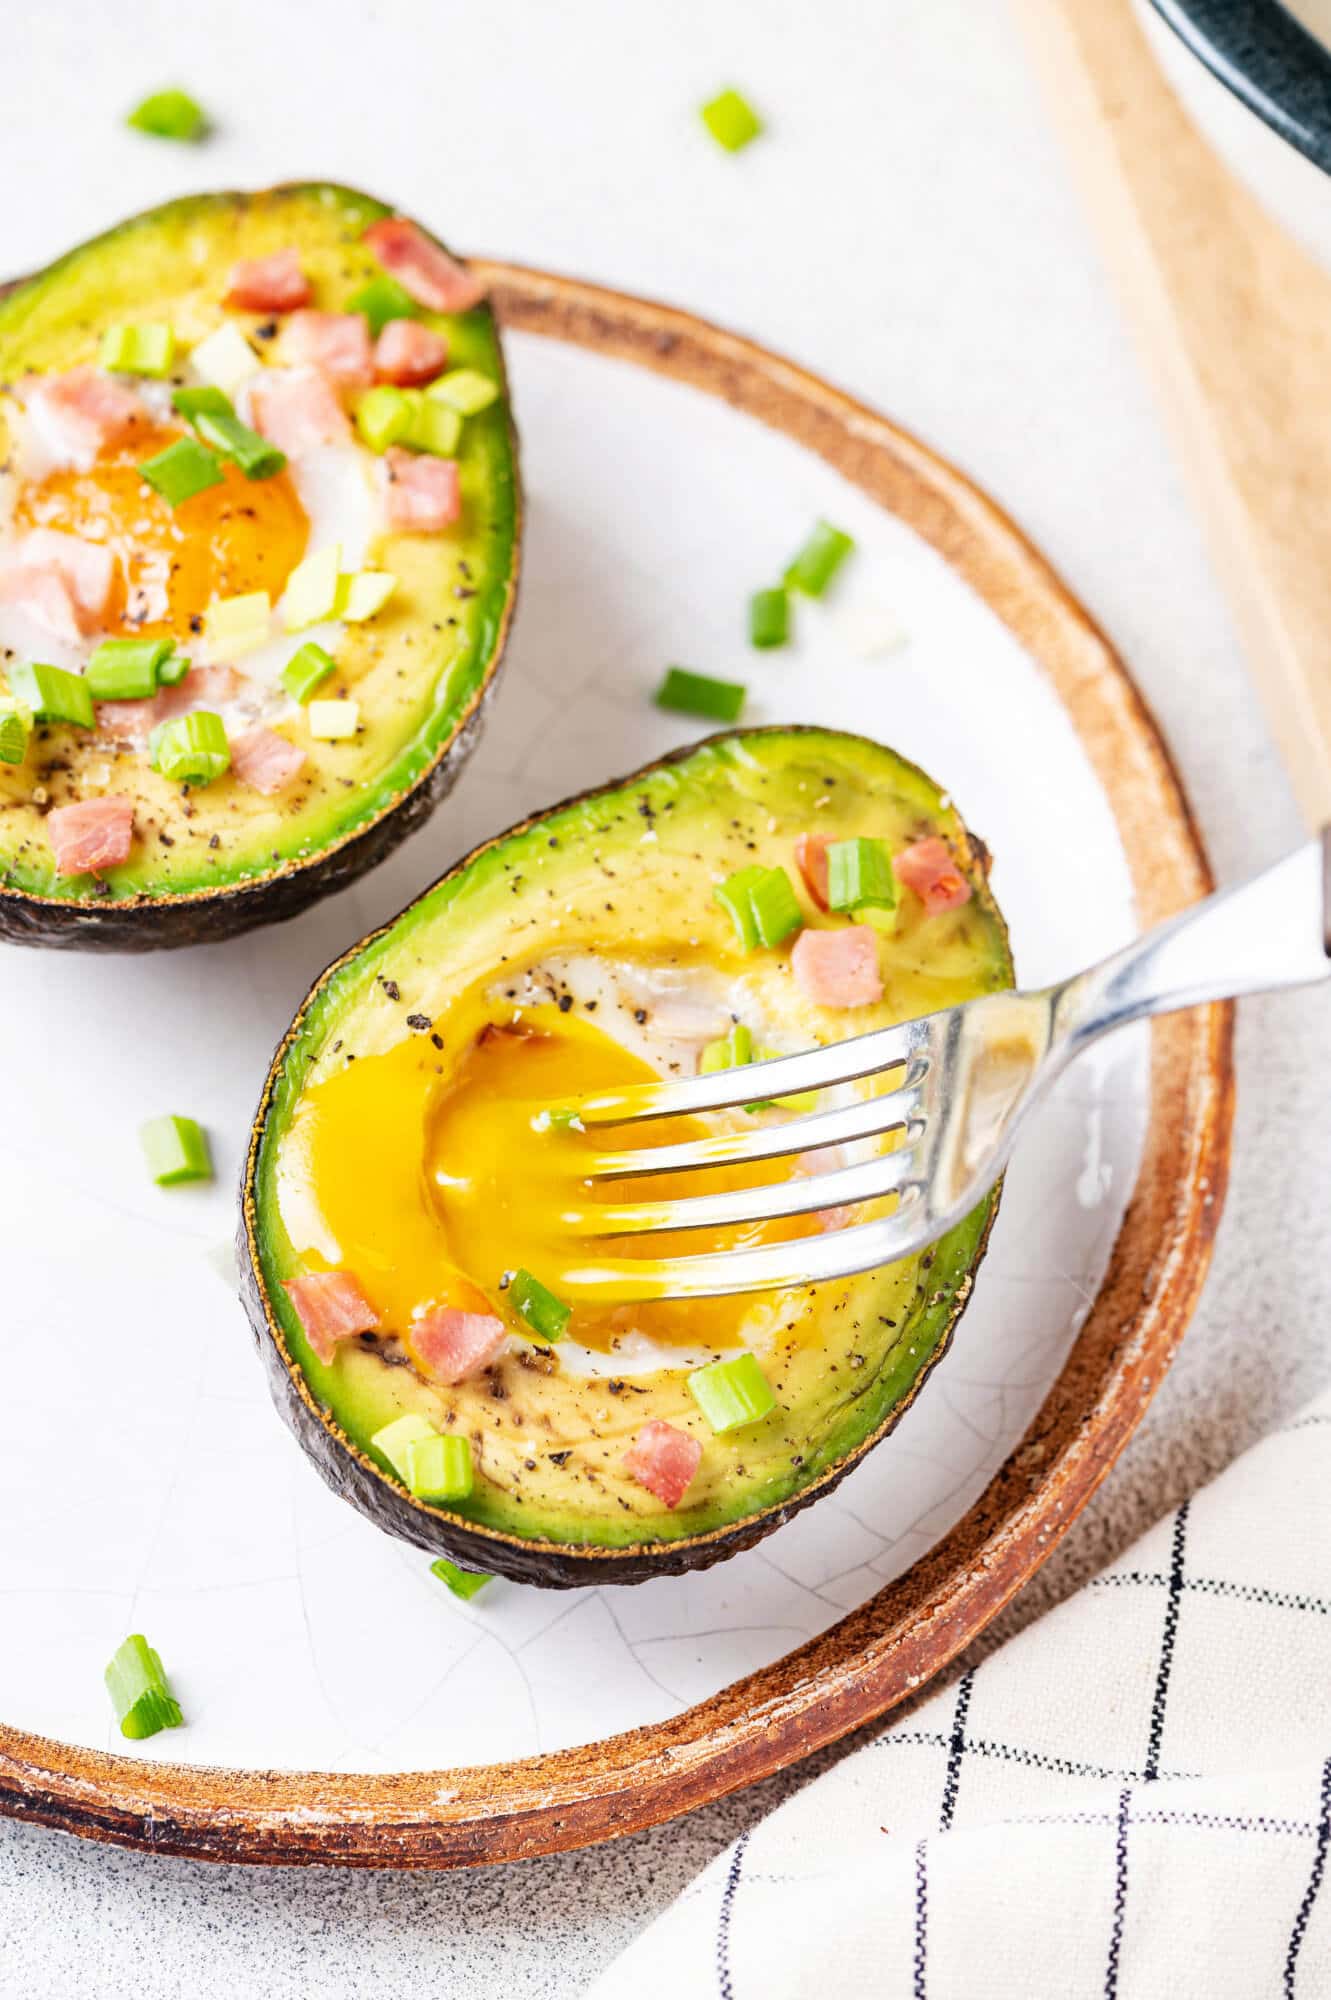 Baked avocado with an egg inside, topped with bacon and green onion on a white plate with a silver fork.